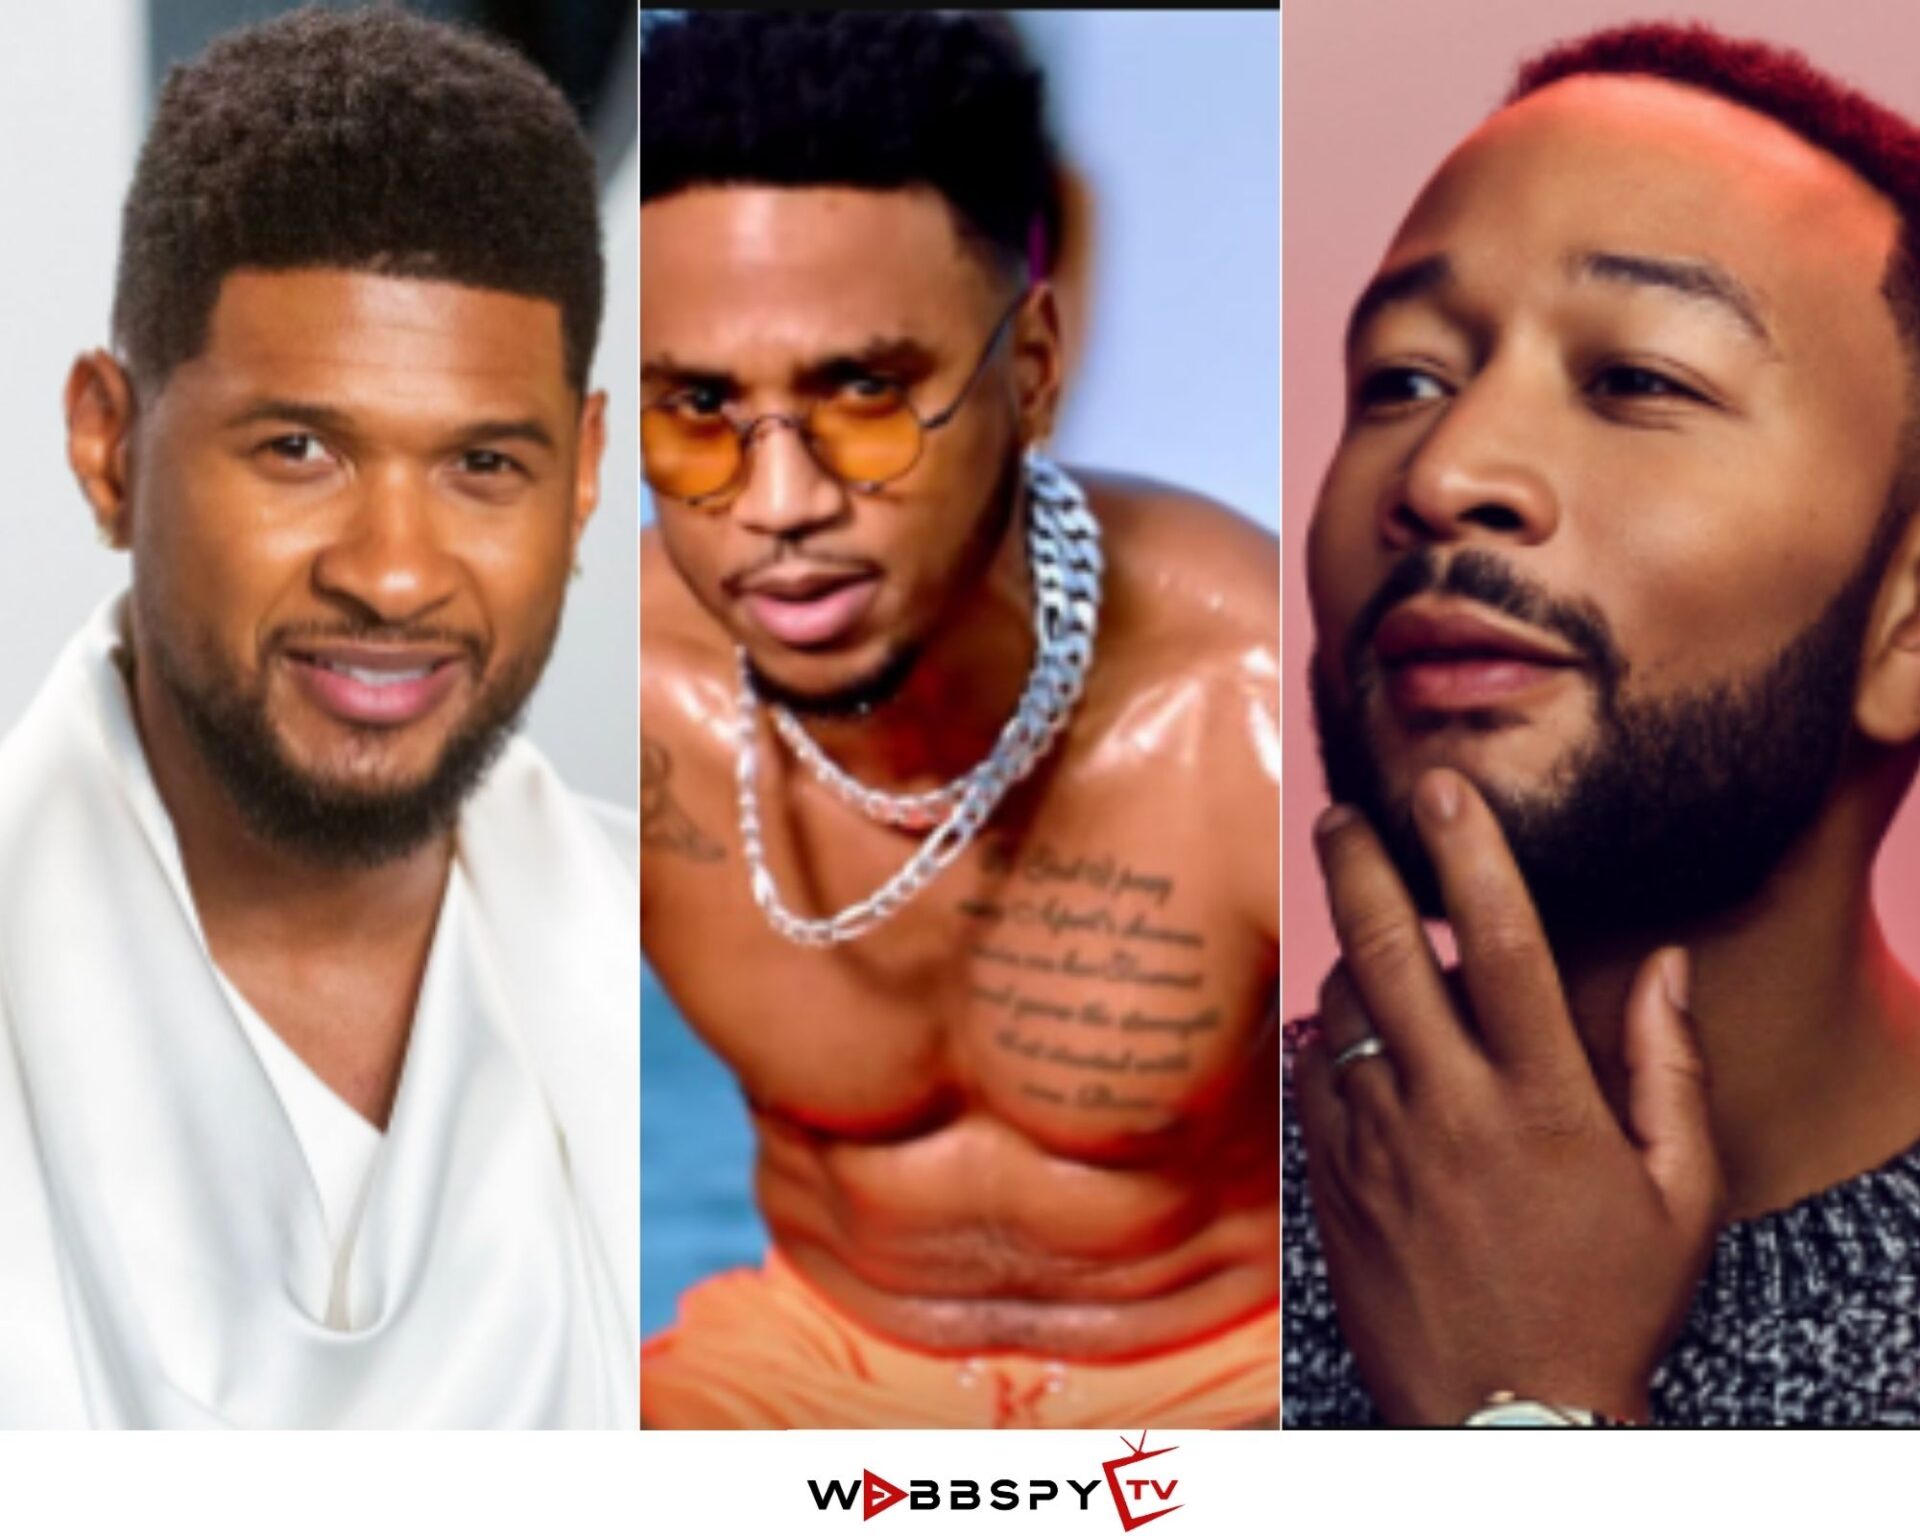 Top 10 Hottest Black Male Singers In The World 2021 1920x1536 